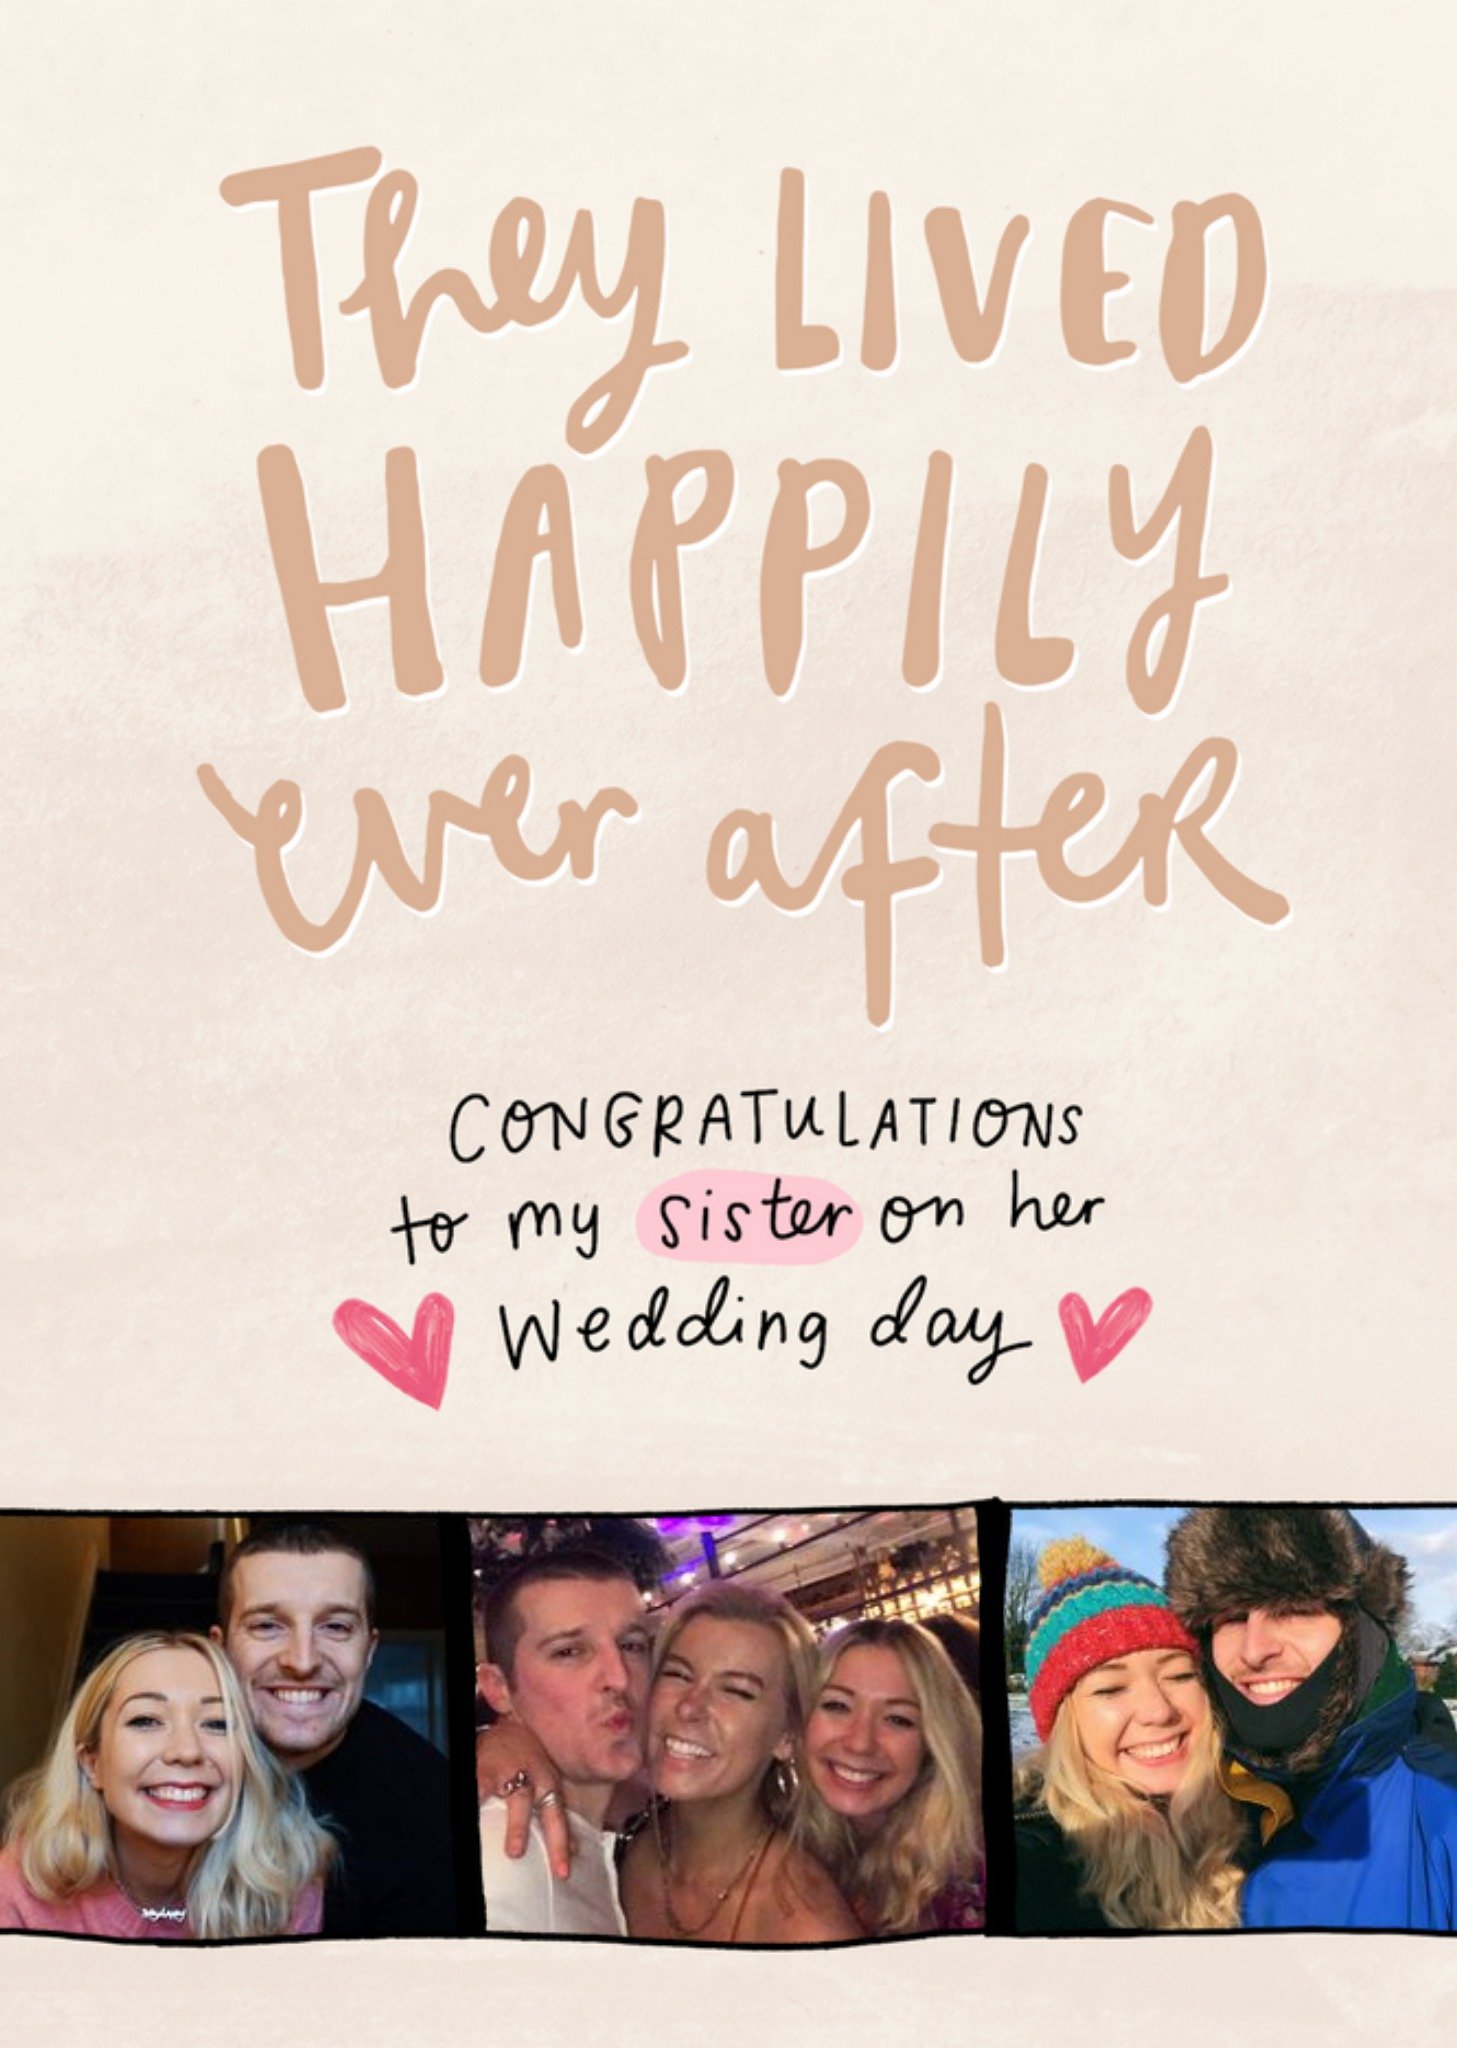 Moonpig The Happy News They Lived Happily Ever After Photo Upload Sister Wedding Day Card, Large